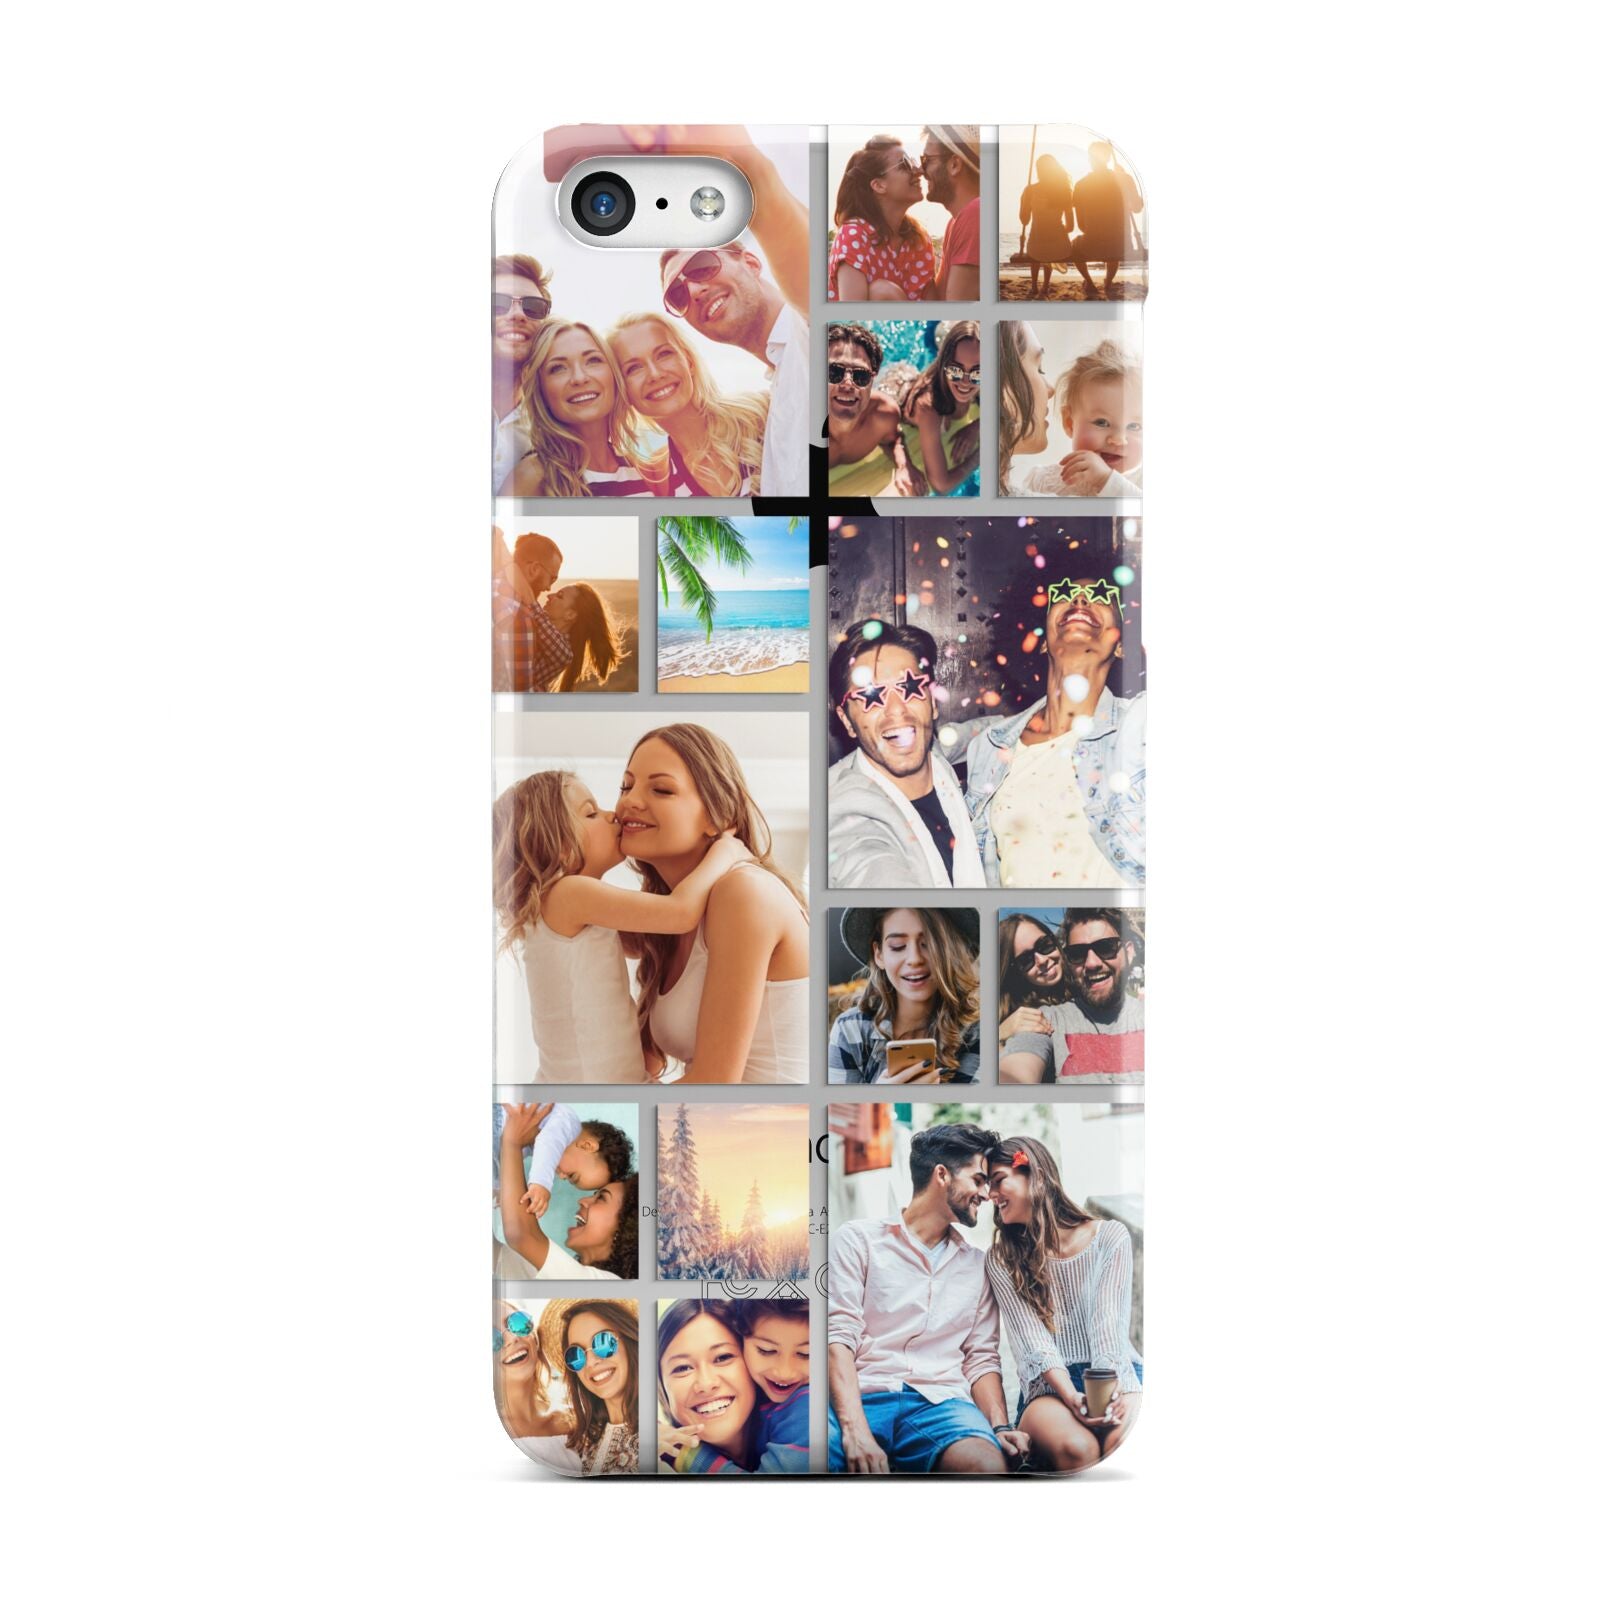 Abstract Multi Tile Photo Montage Upload Apple iPhone 5c Case